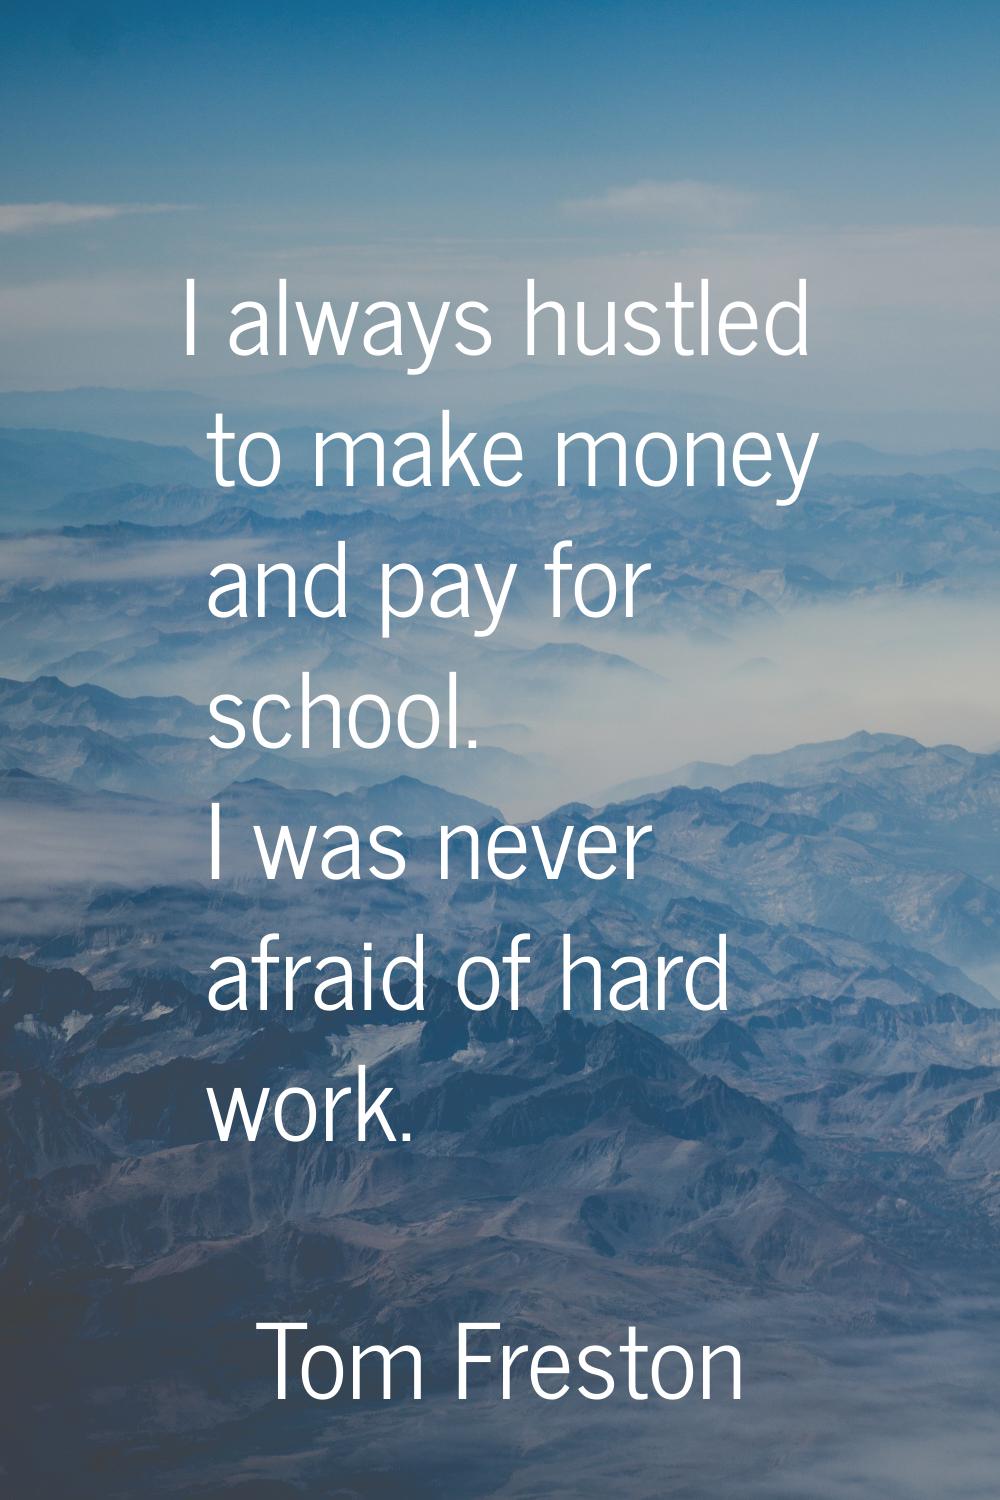 I always hustled to make money and pay for school. I was never afraid of hard work.